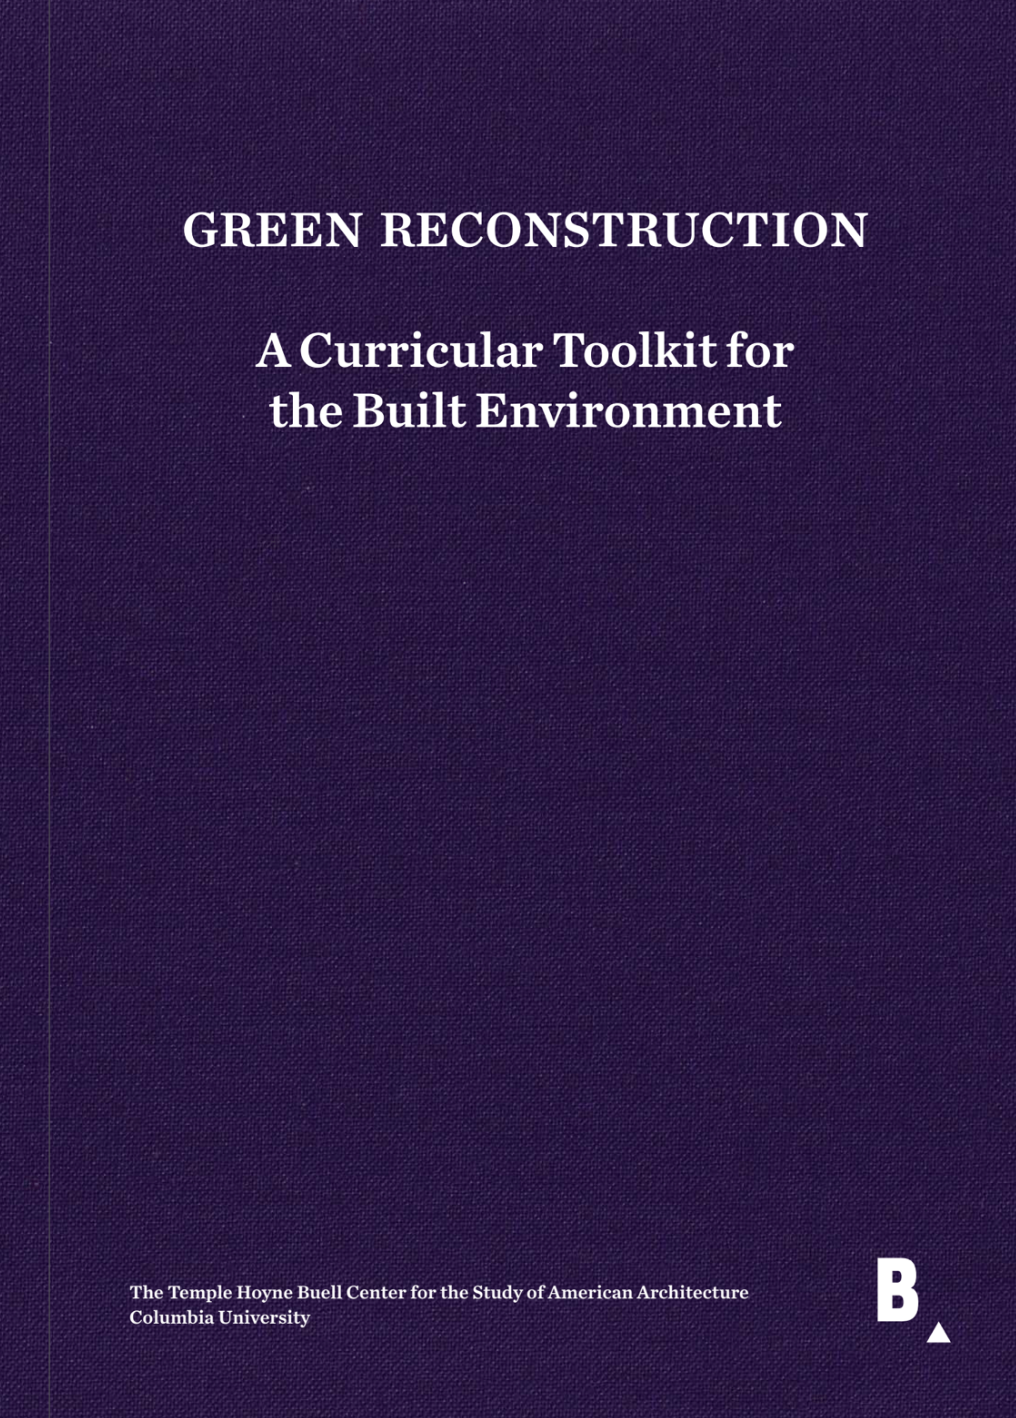 On a textured, tall vertical purple background, white text reads: "GREEN RECONSTRUCTION: A Curricular Toolkit for the Built Environment." Institutional information for the Buell Center is in small text at the bottom.